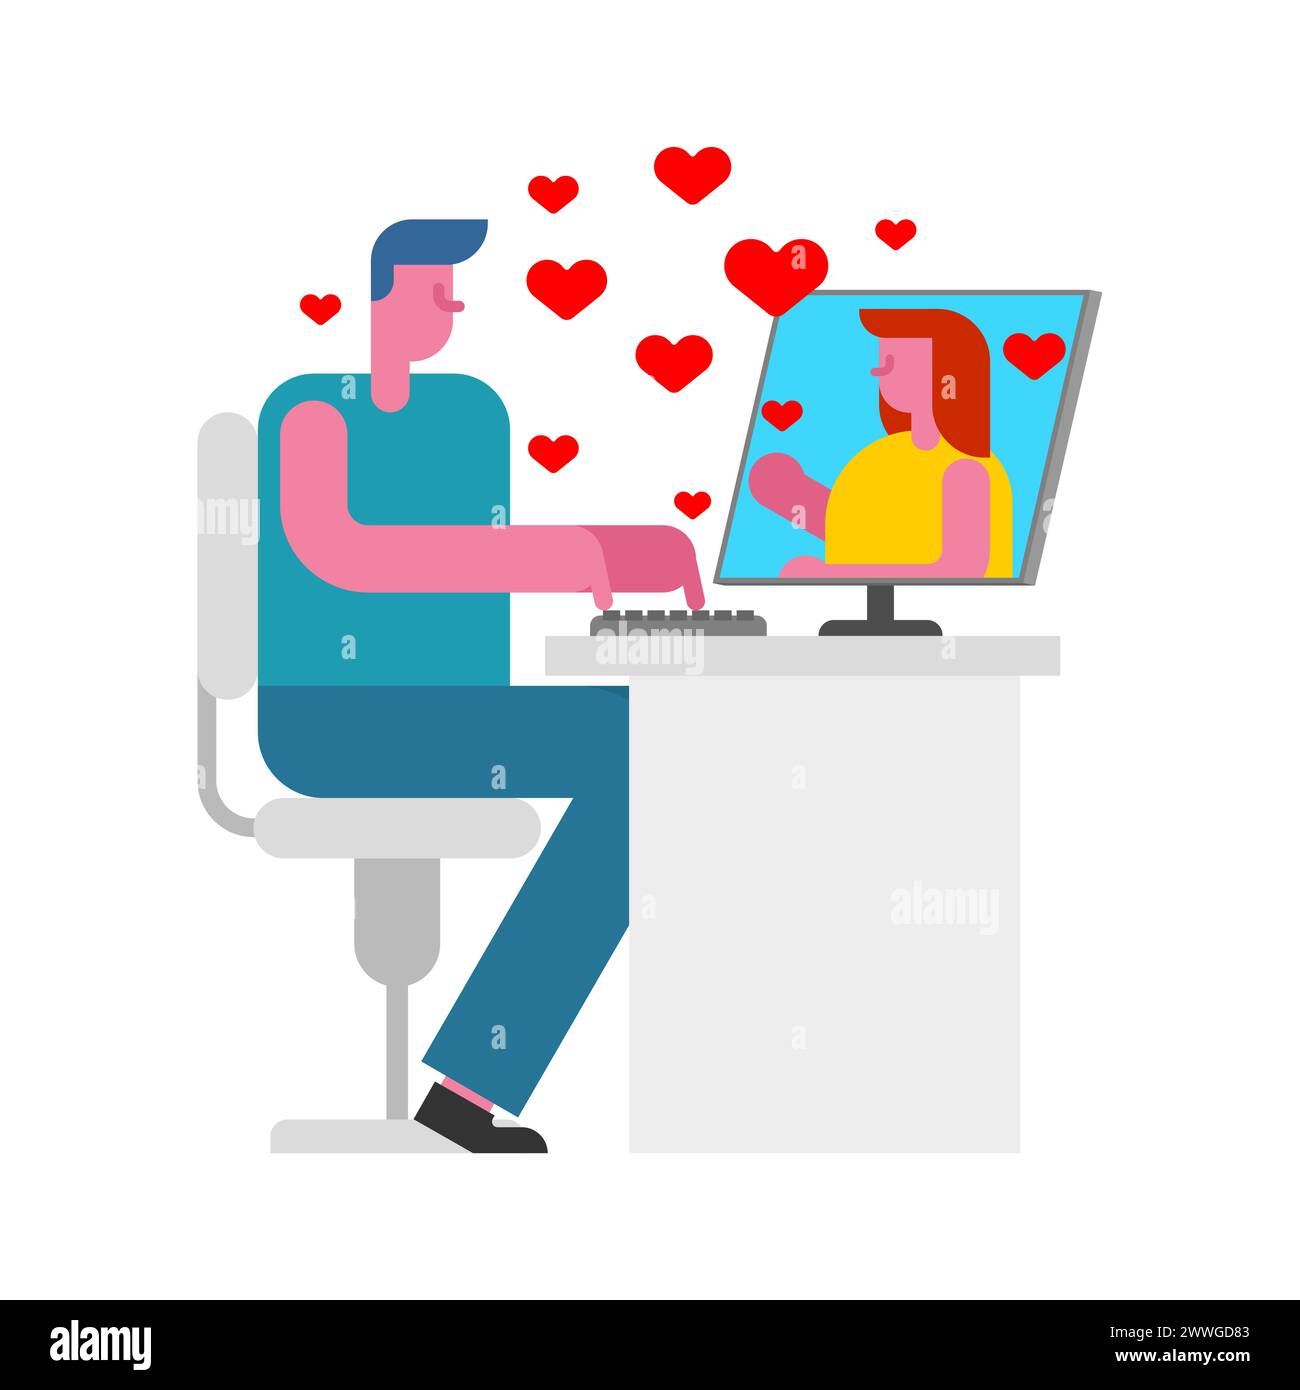 Online love. Virtual love relationships. Love correspondence on Internet. guy at computer writes to his beloved. Online dating. Stock Vector